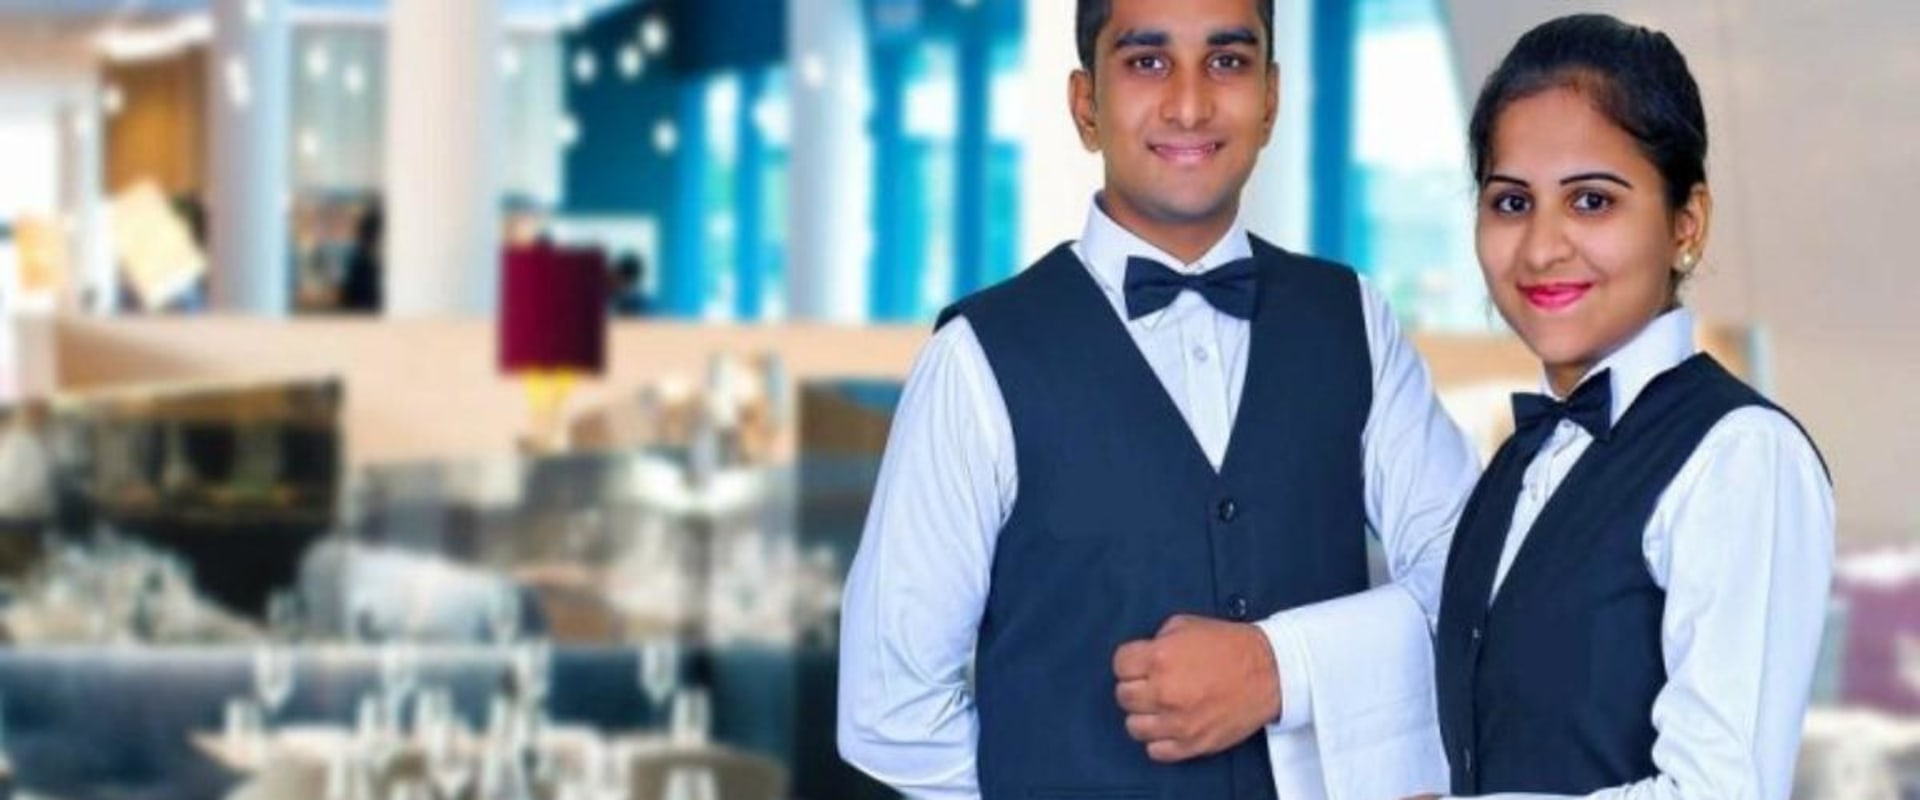 Is hospitality management a good career in india?